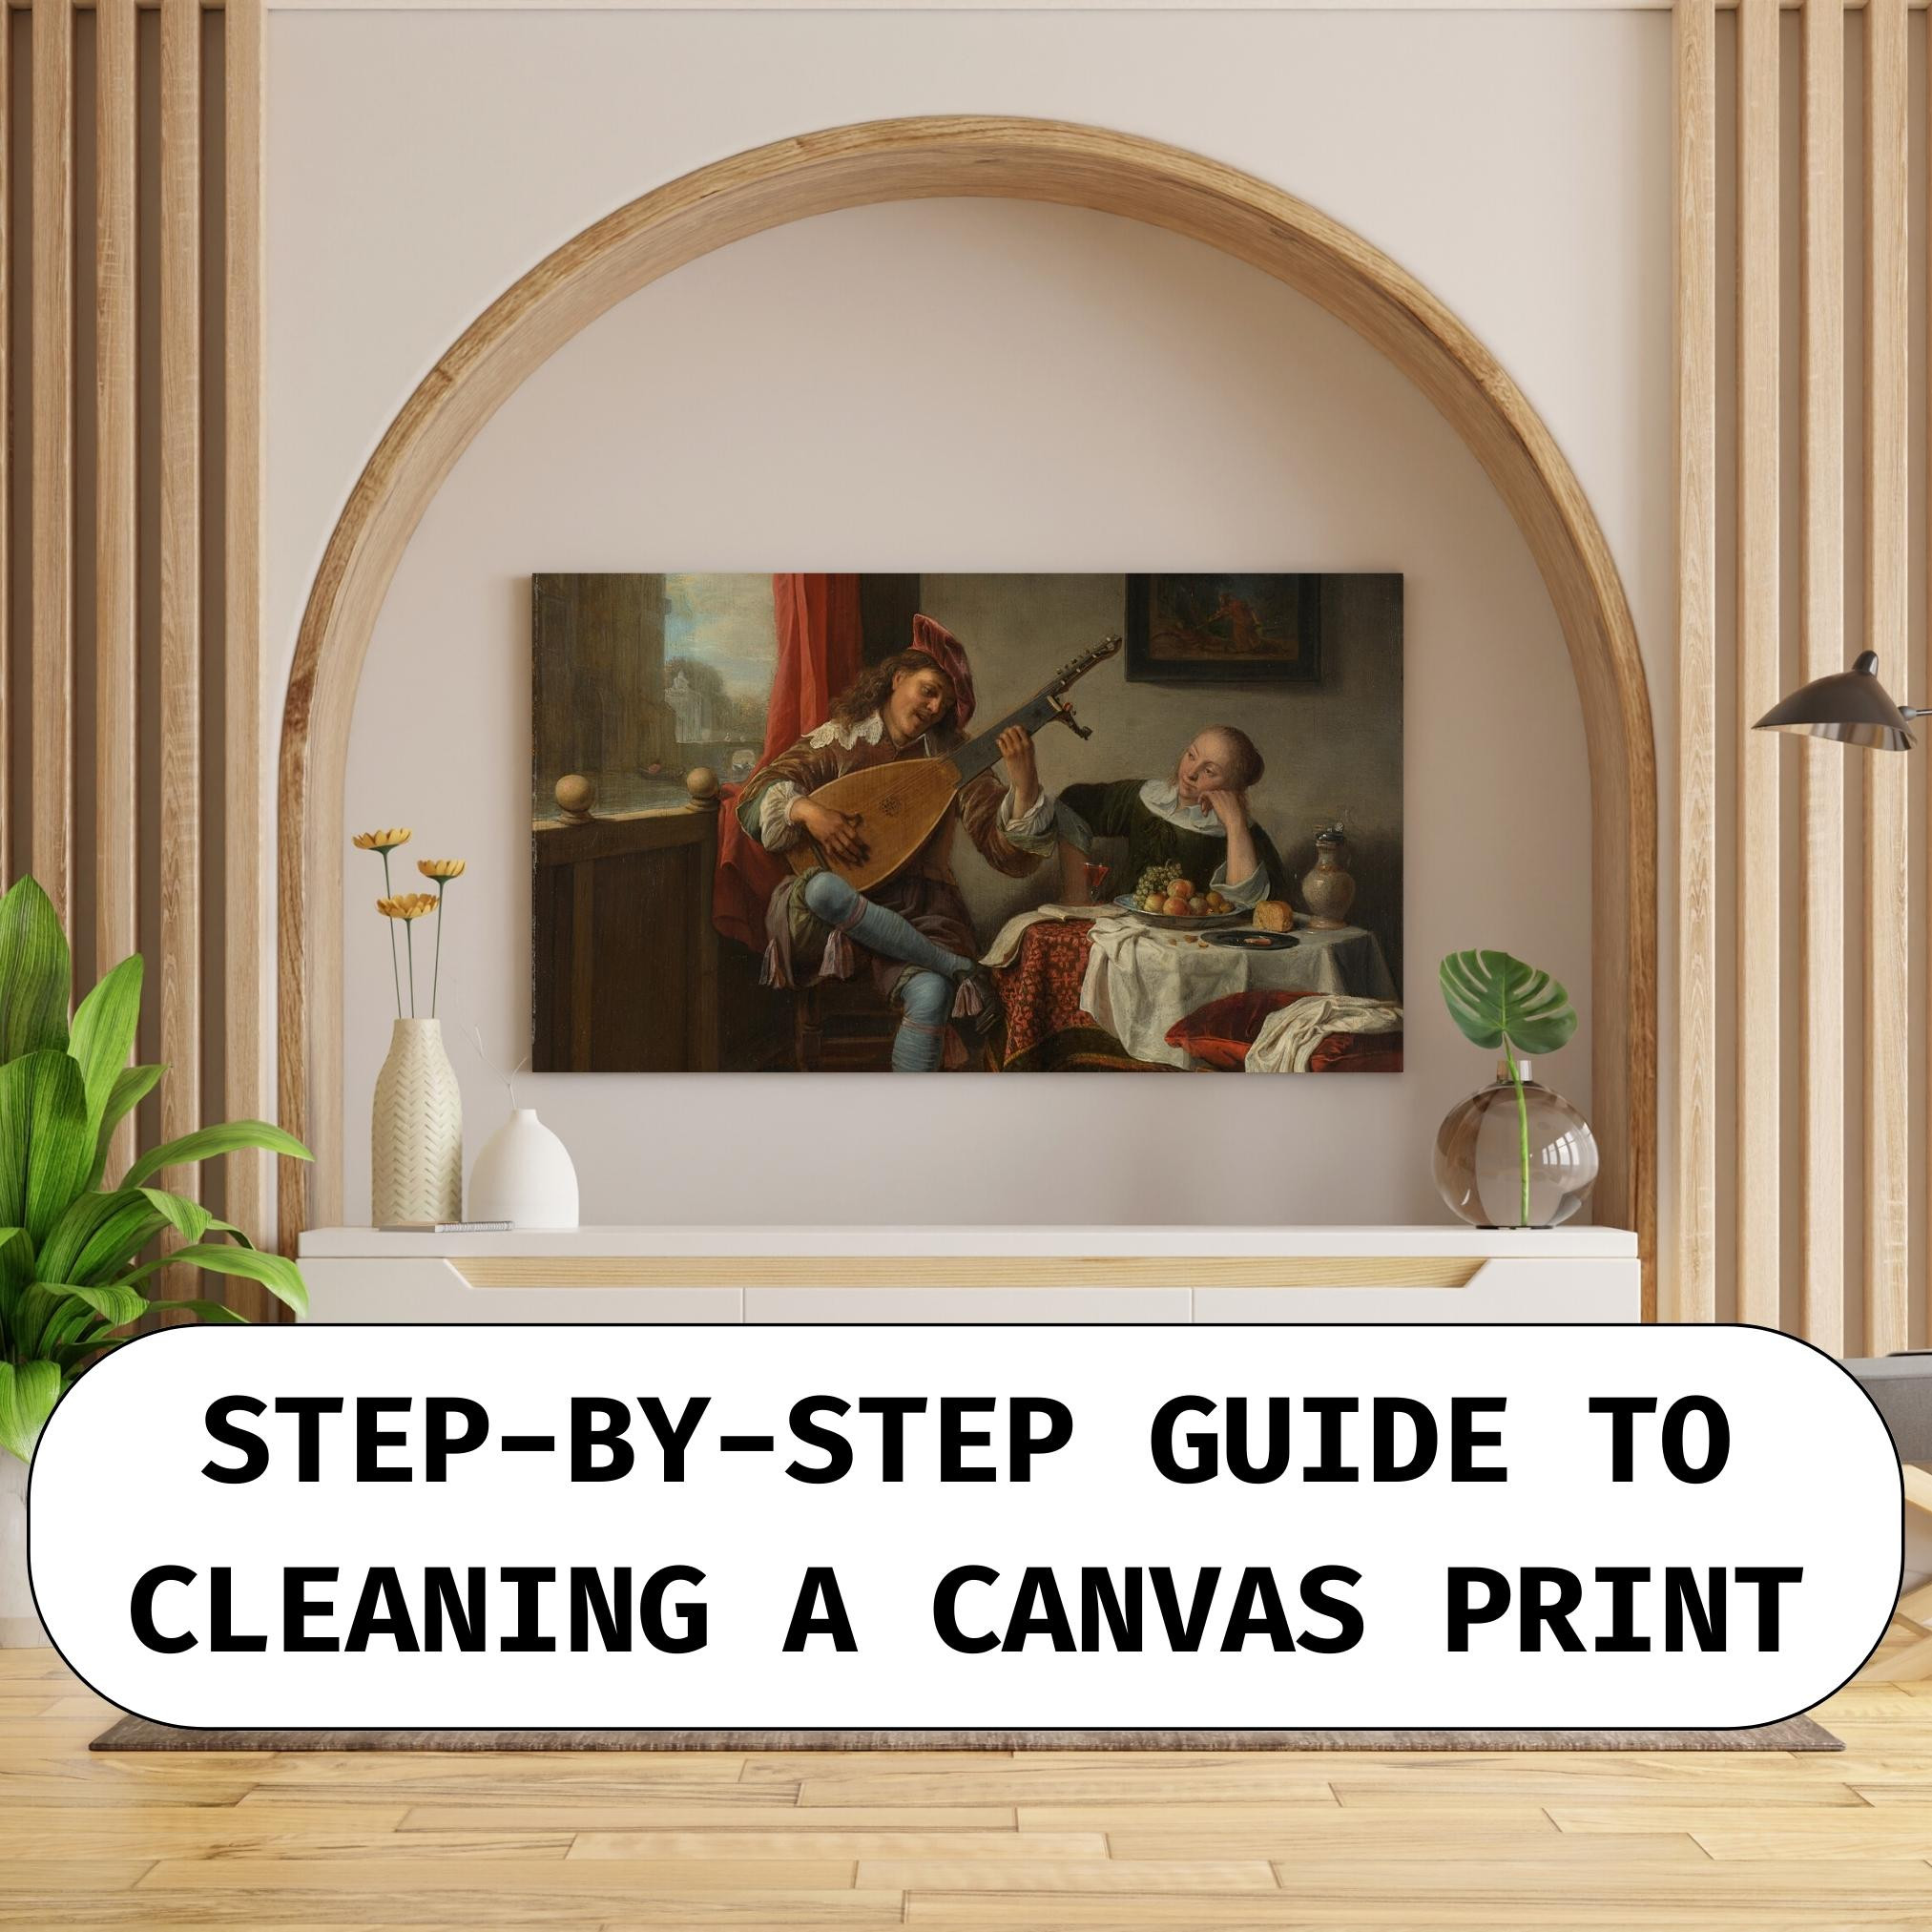 Step-by-Step Guide to Cleaning a Canvas Print